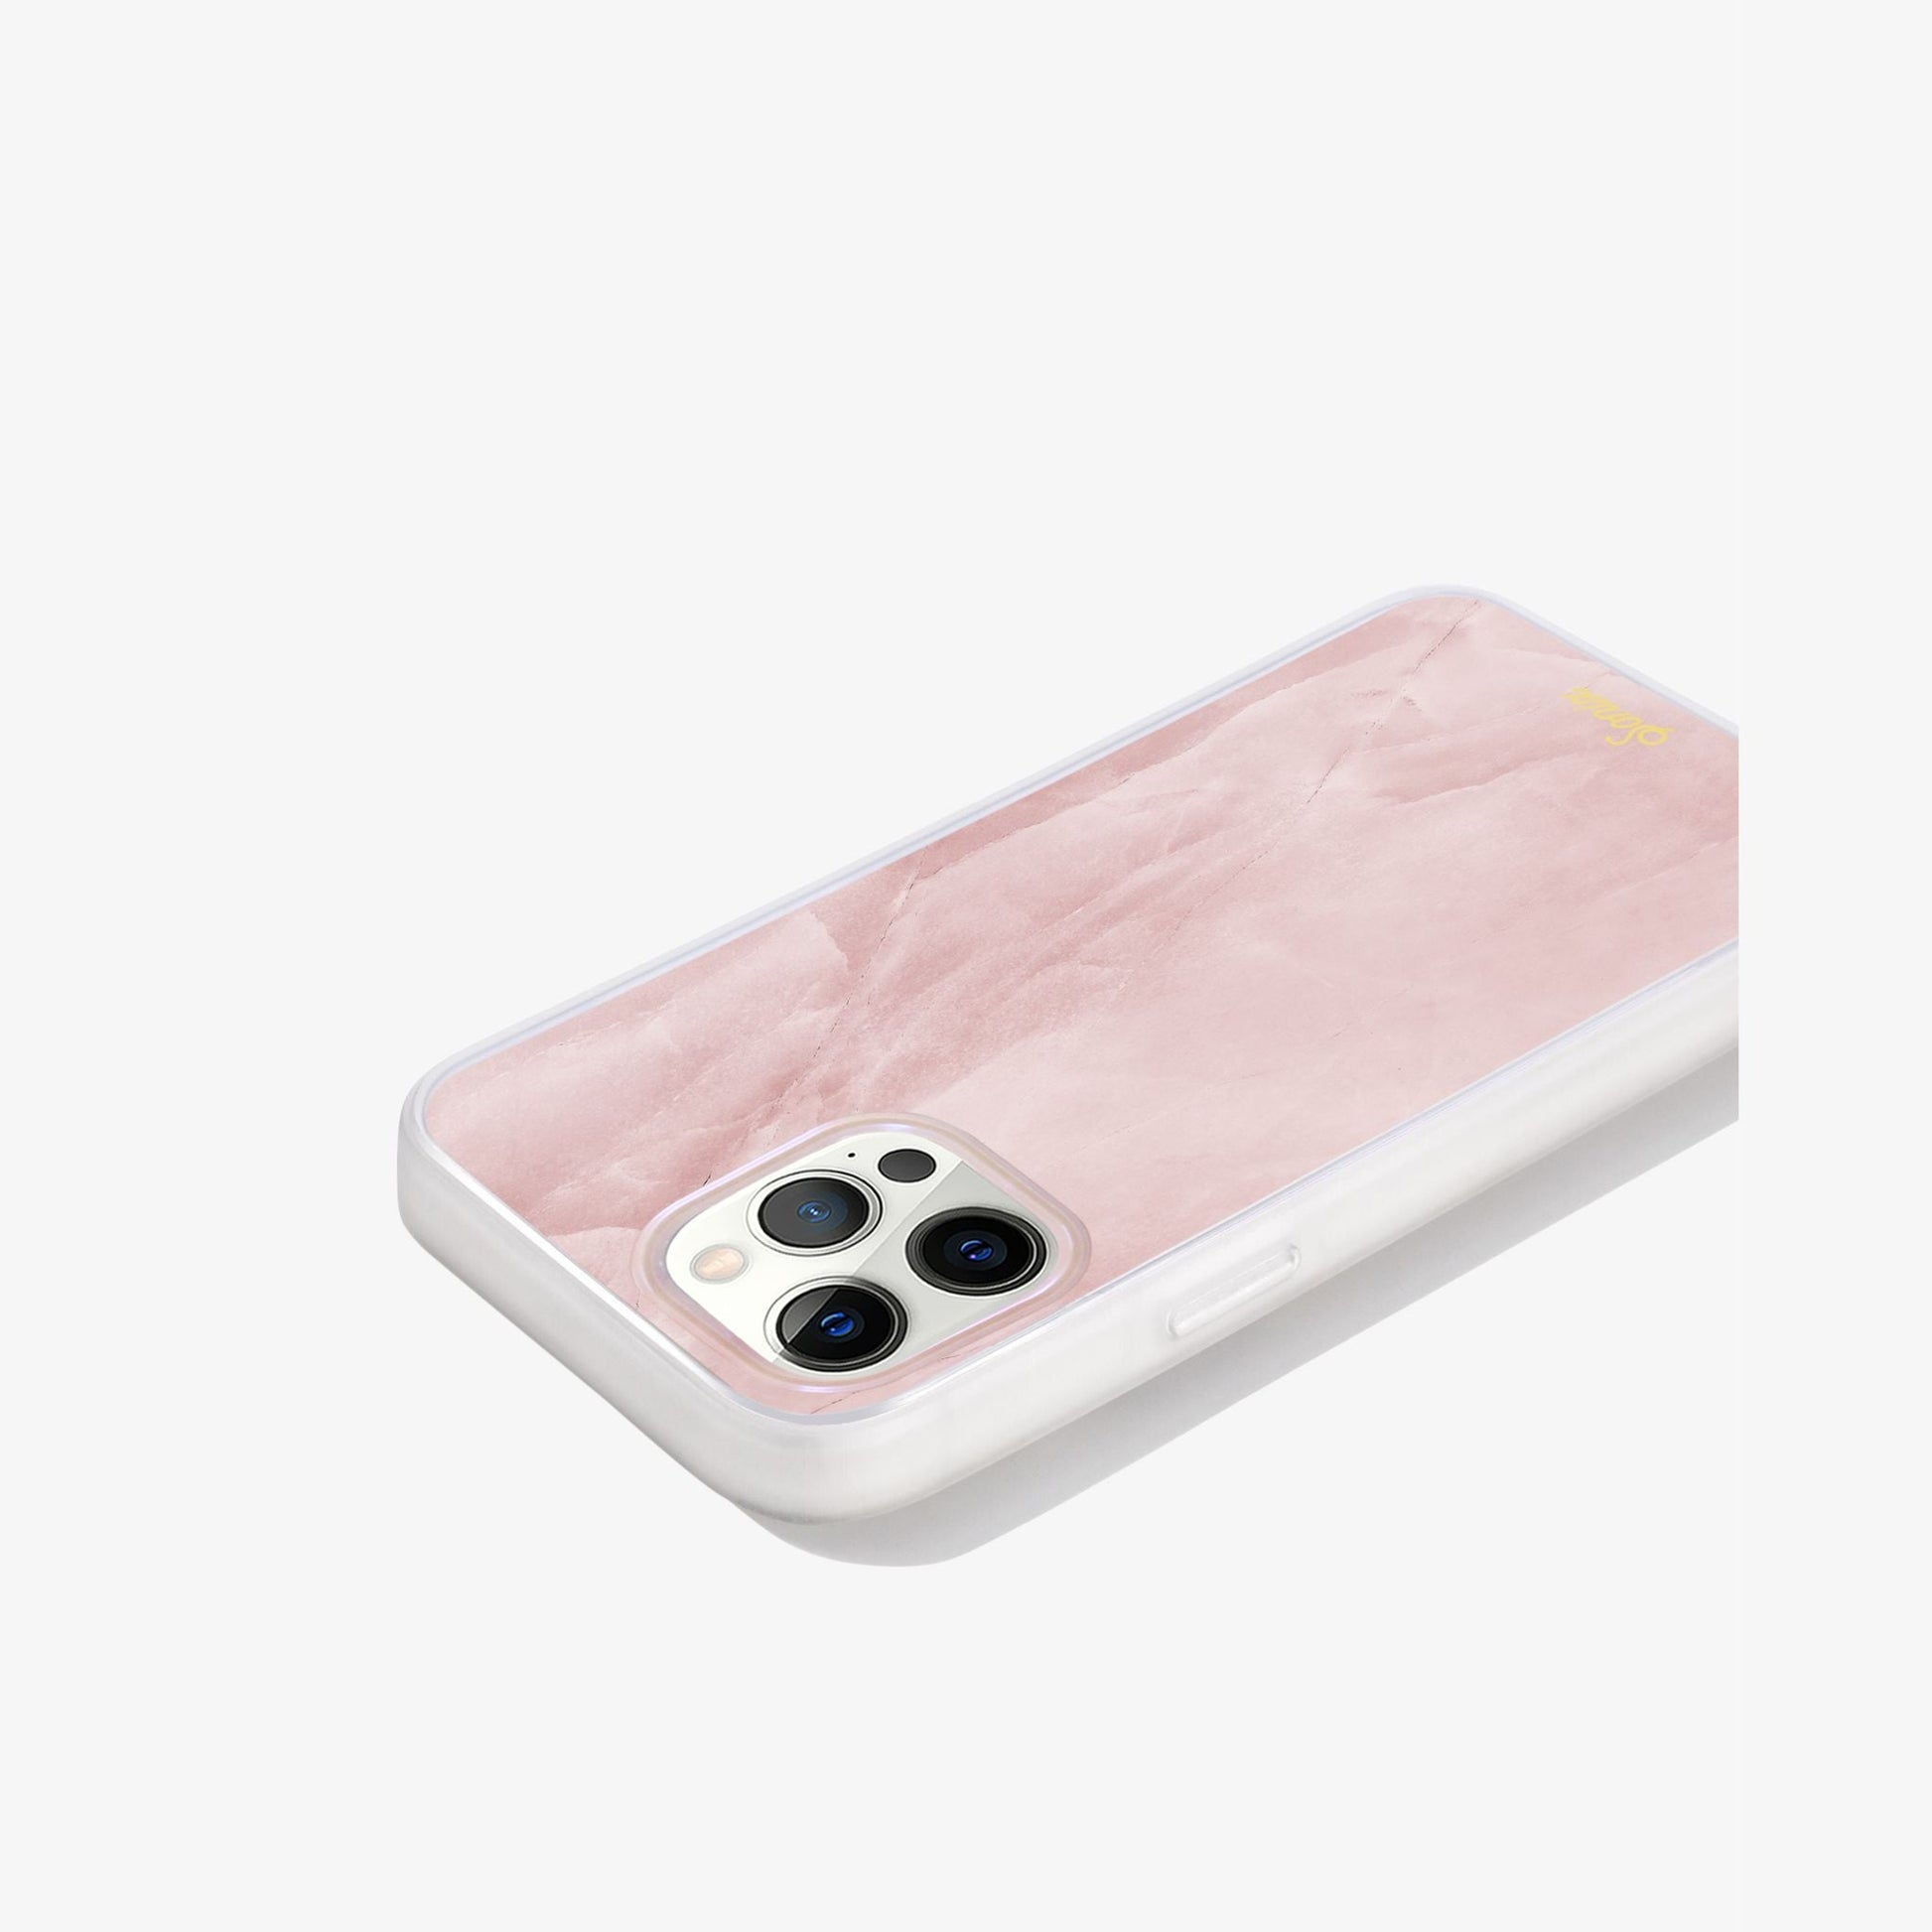 a gleaming pearl design with a pink finish shown on an iphone 12 pro 